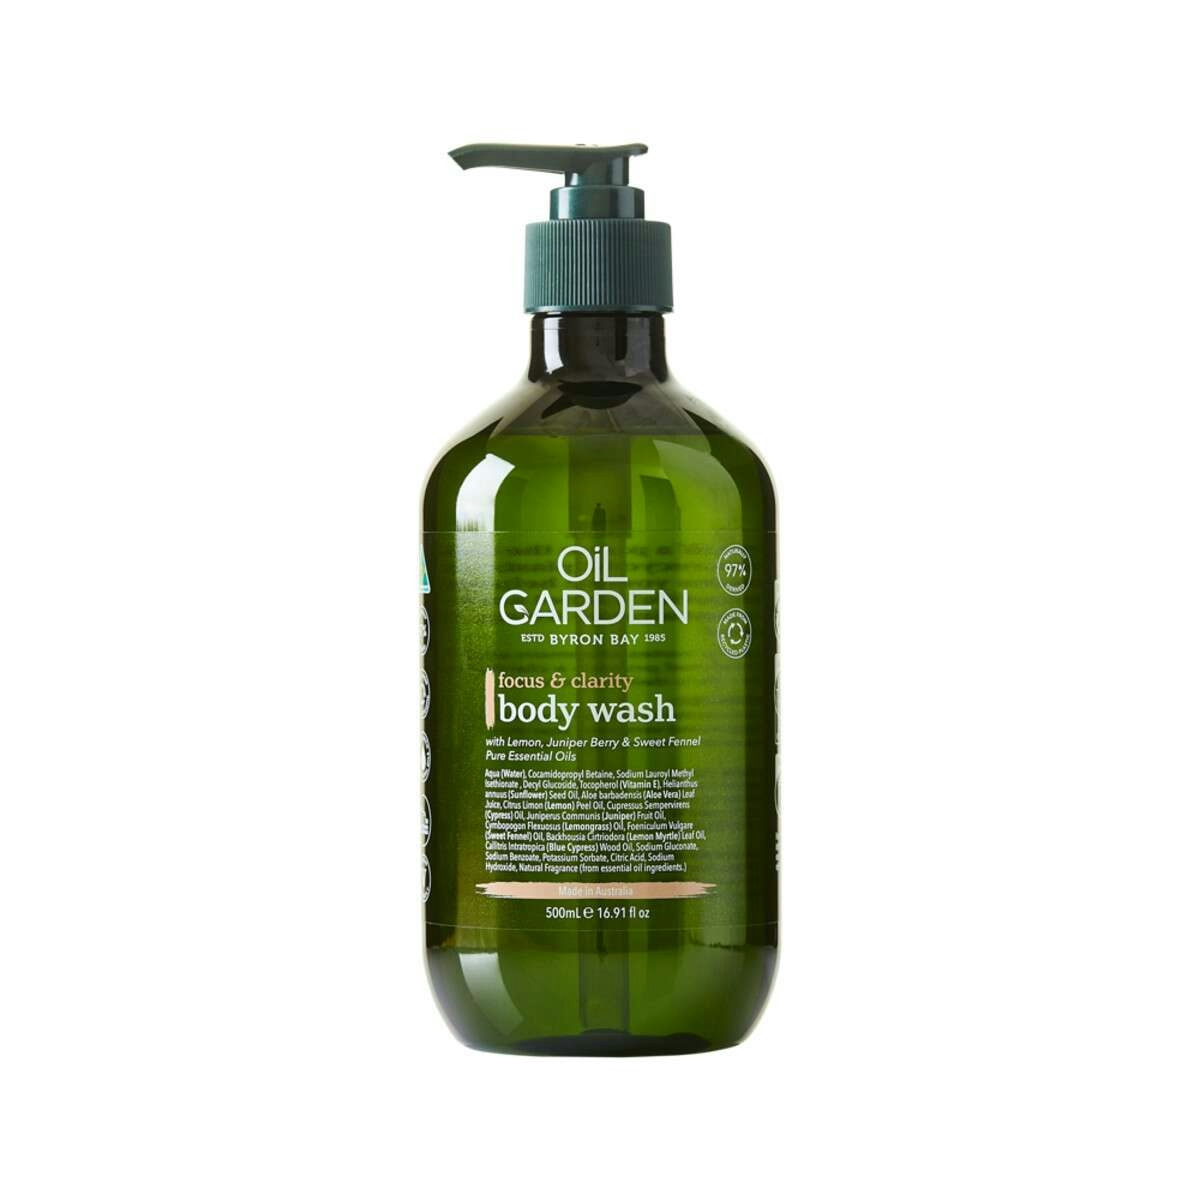 image of Oil Garden Body Wash Focus & Clarity 500ml on white background